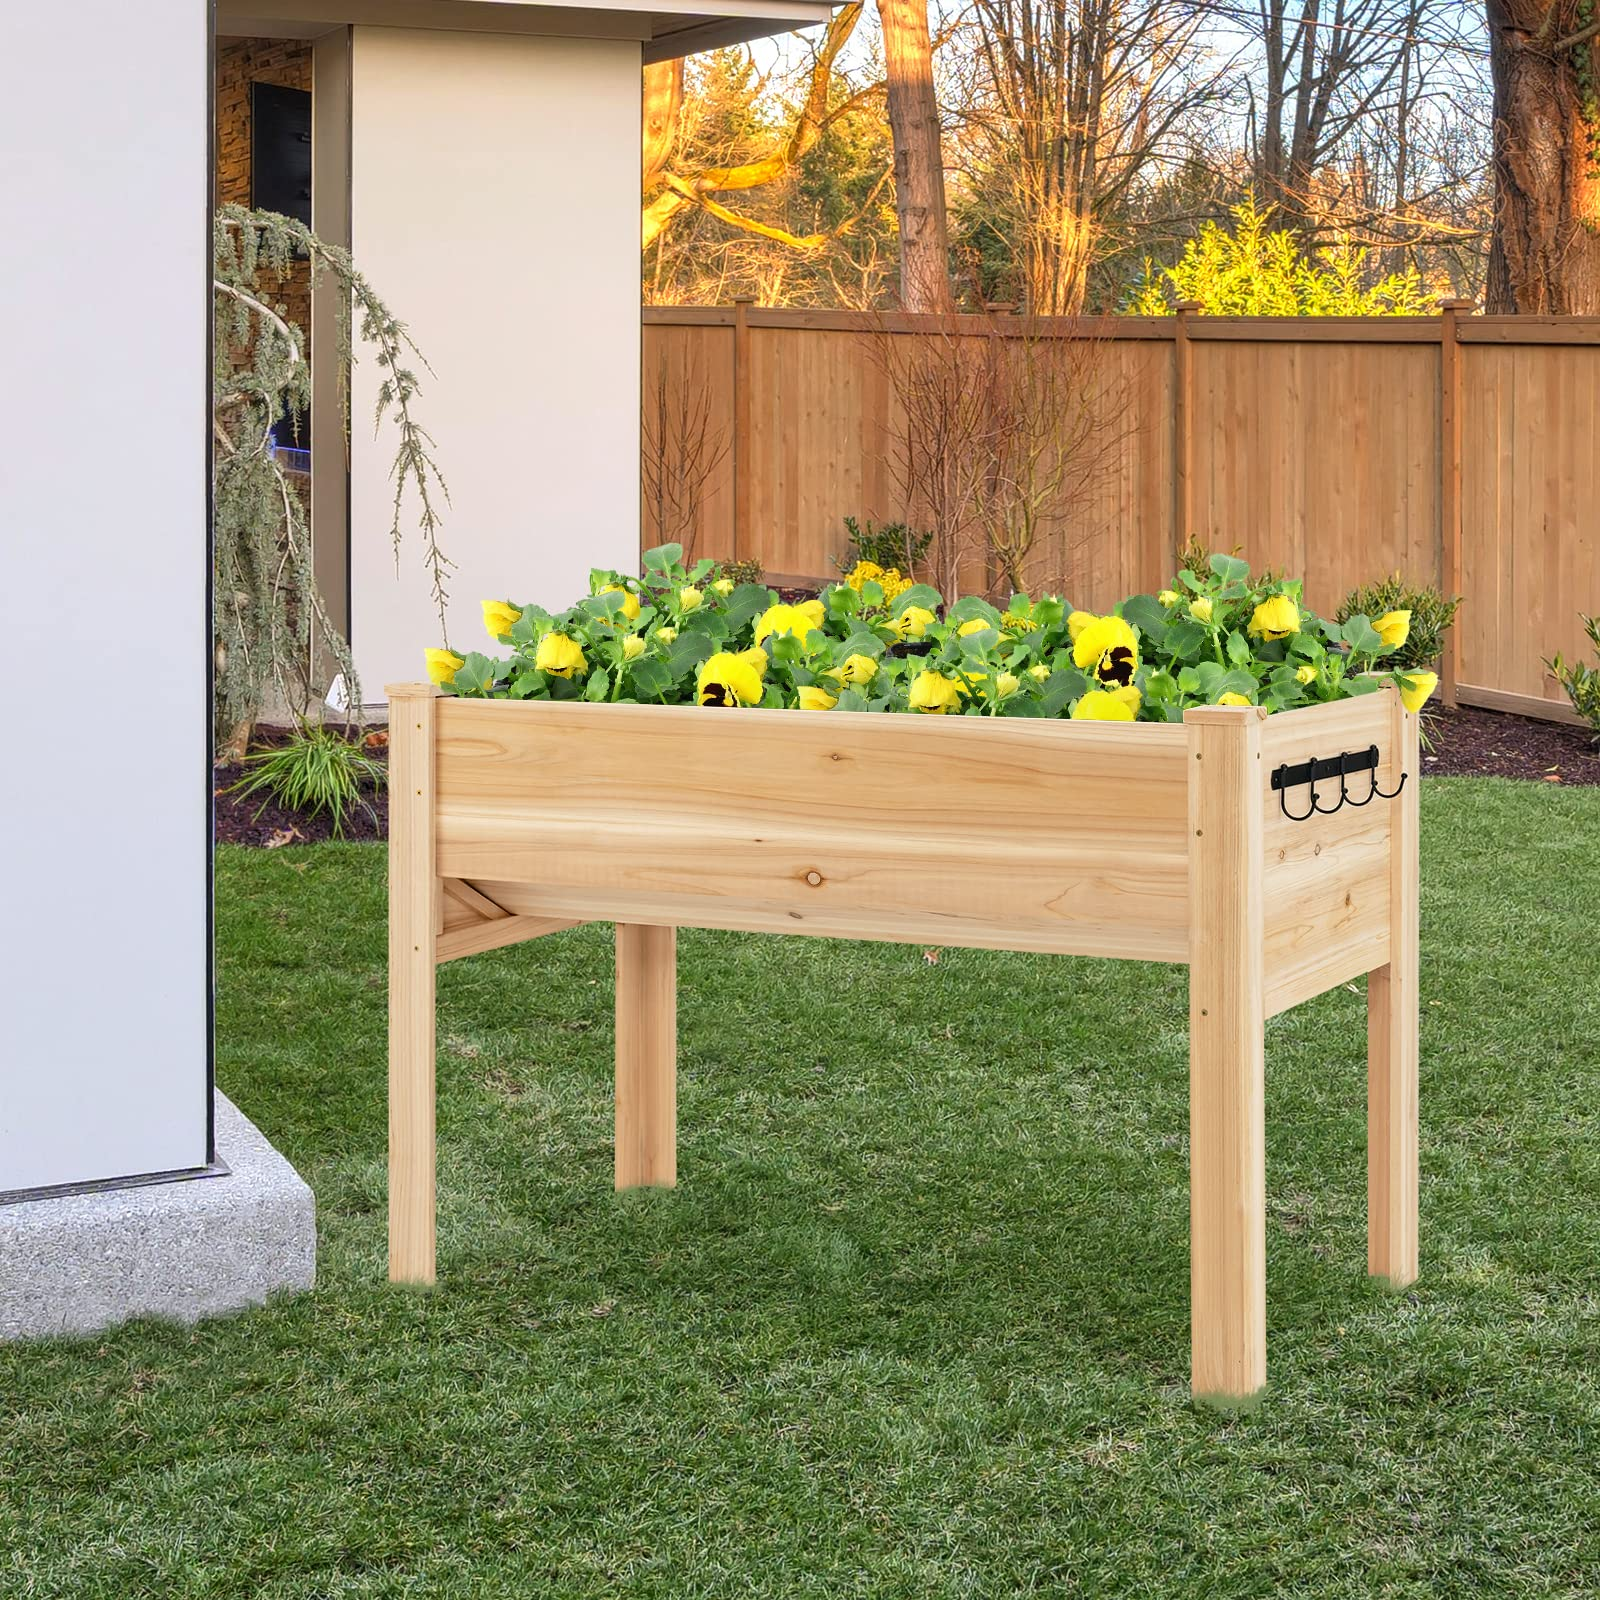 Giantex Planter Raised Bed, Garden Bed with Legs